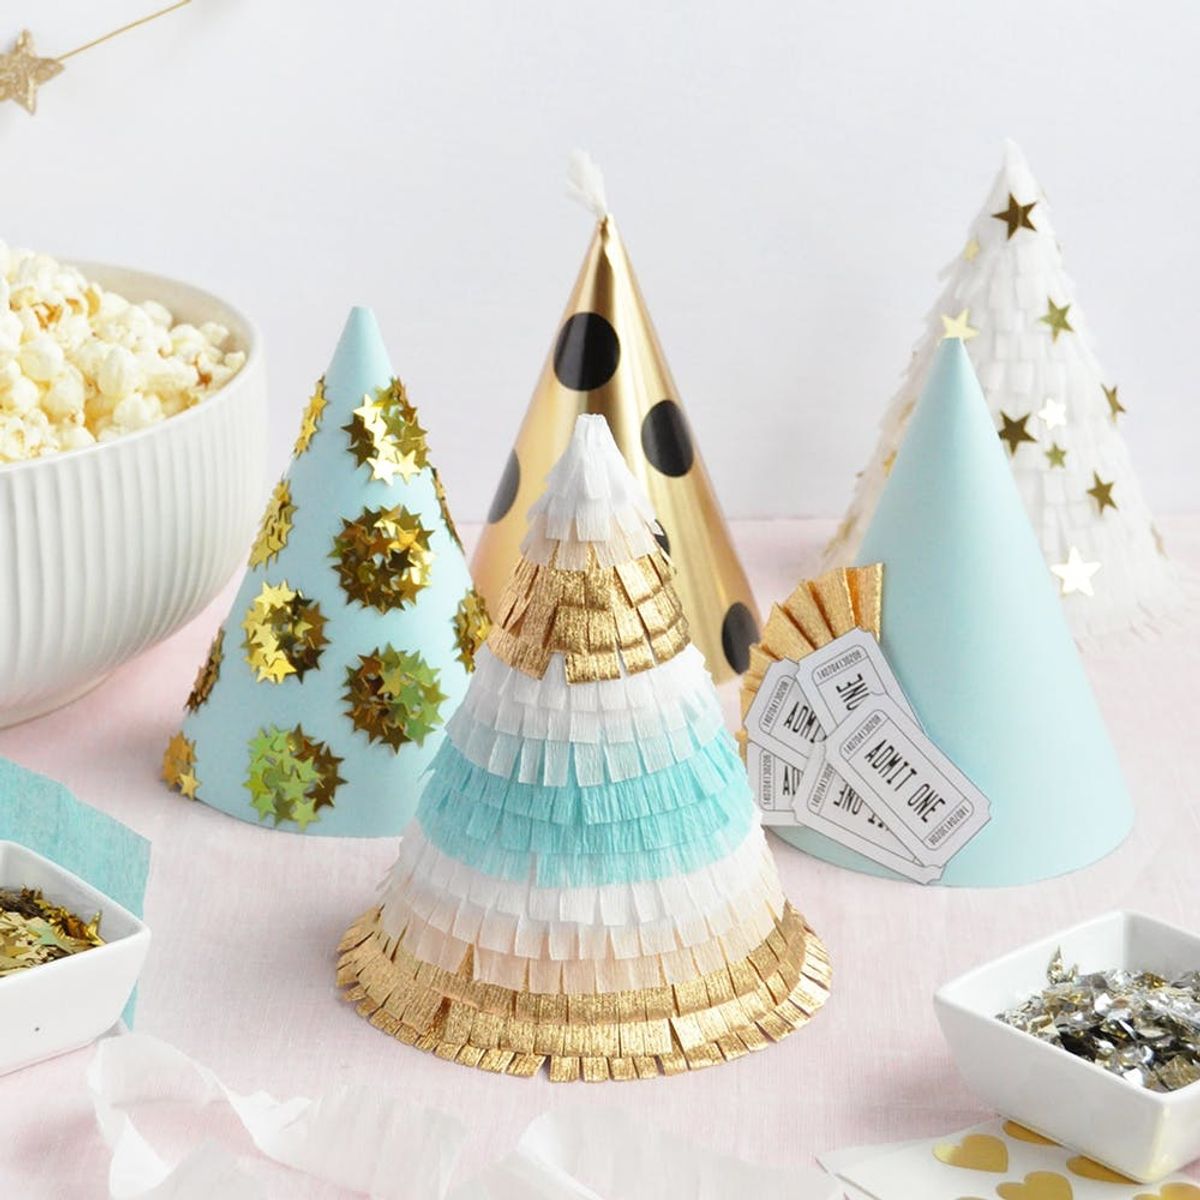 DIY Your Own Glam Party Hats for the Oscars